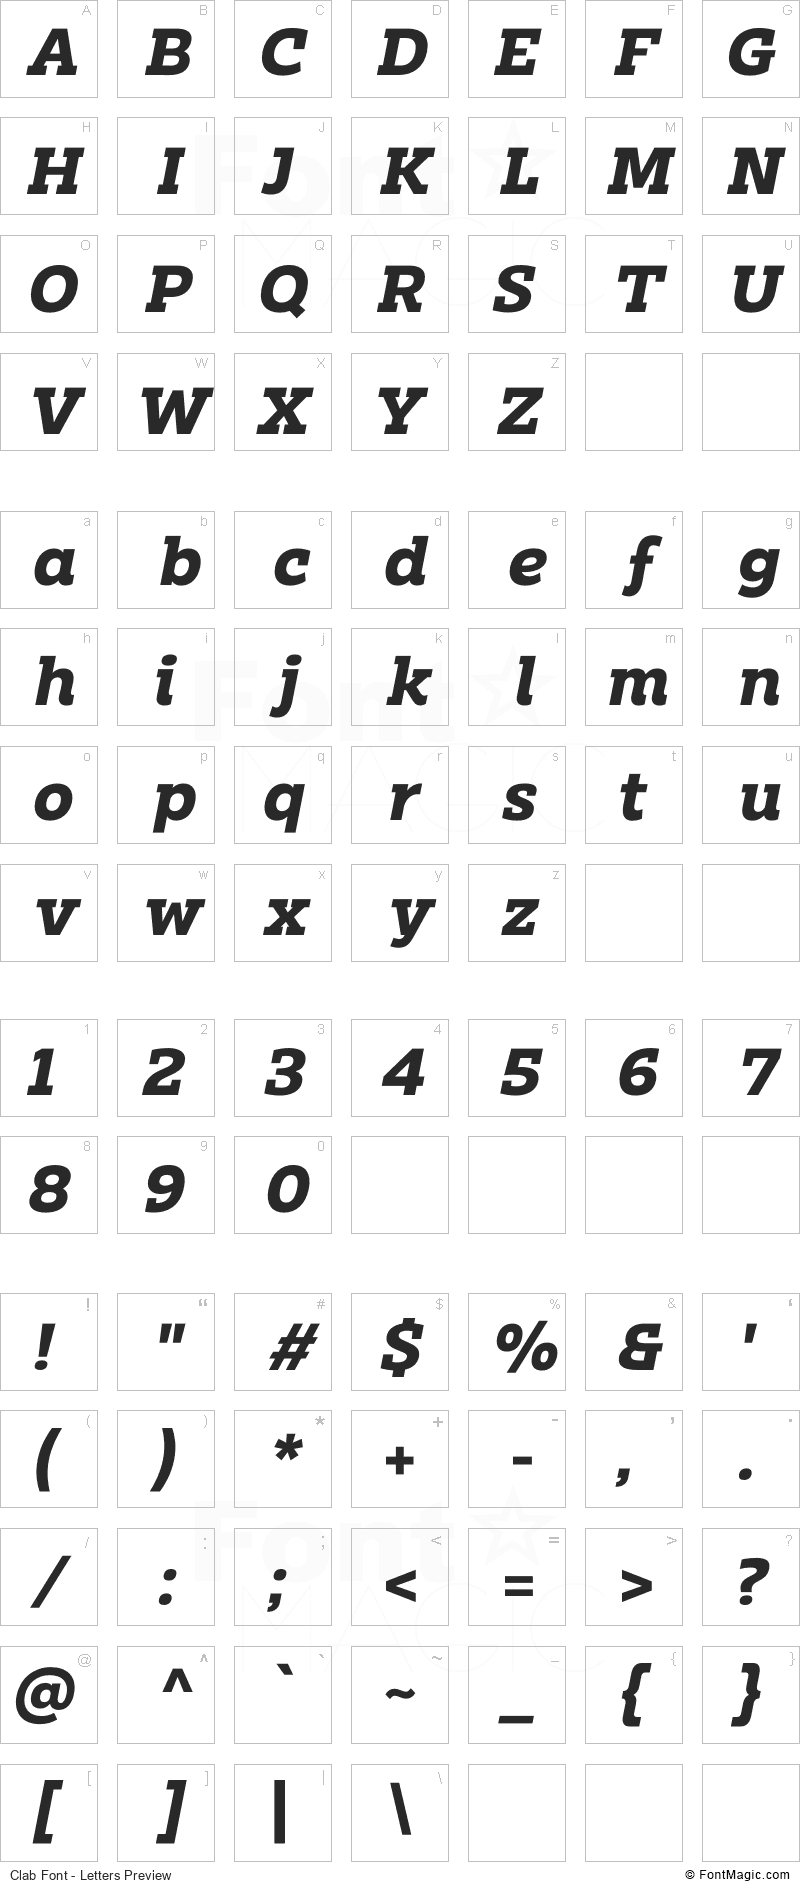 Clab Font - All Latters Preview Chart